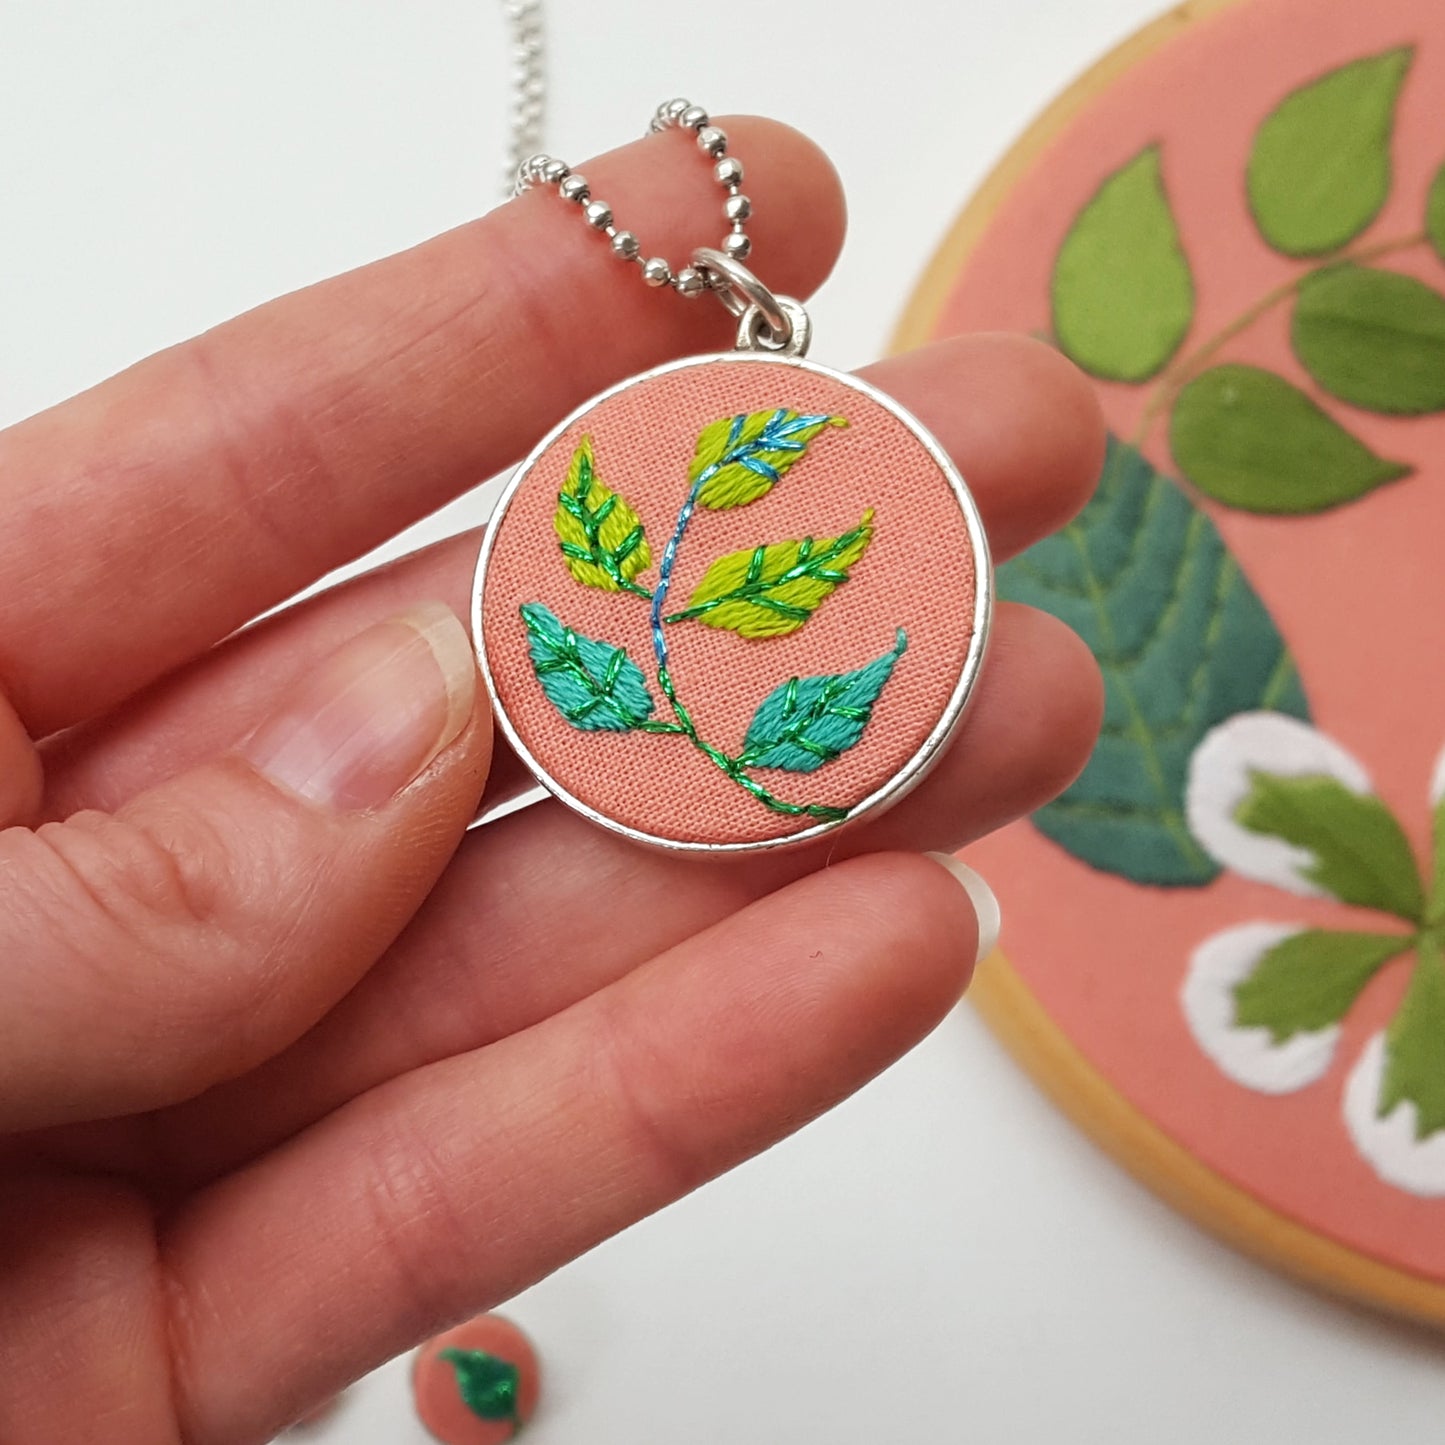 Hand Embroidered Jewelry Collection: Plants on Pink